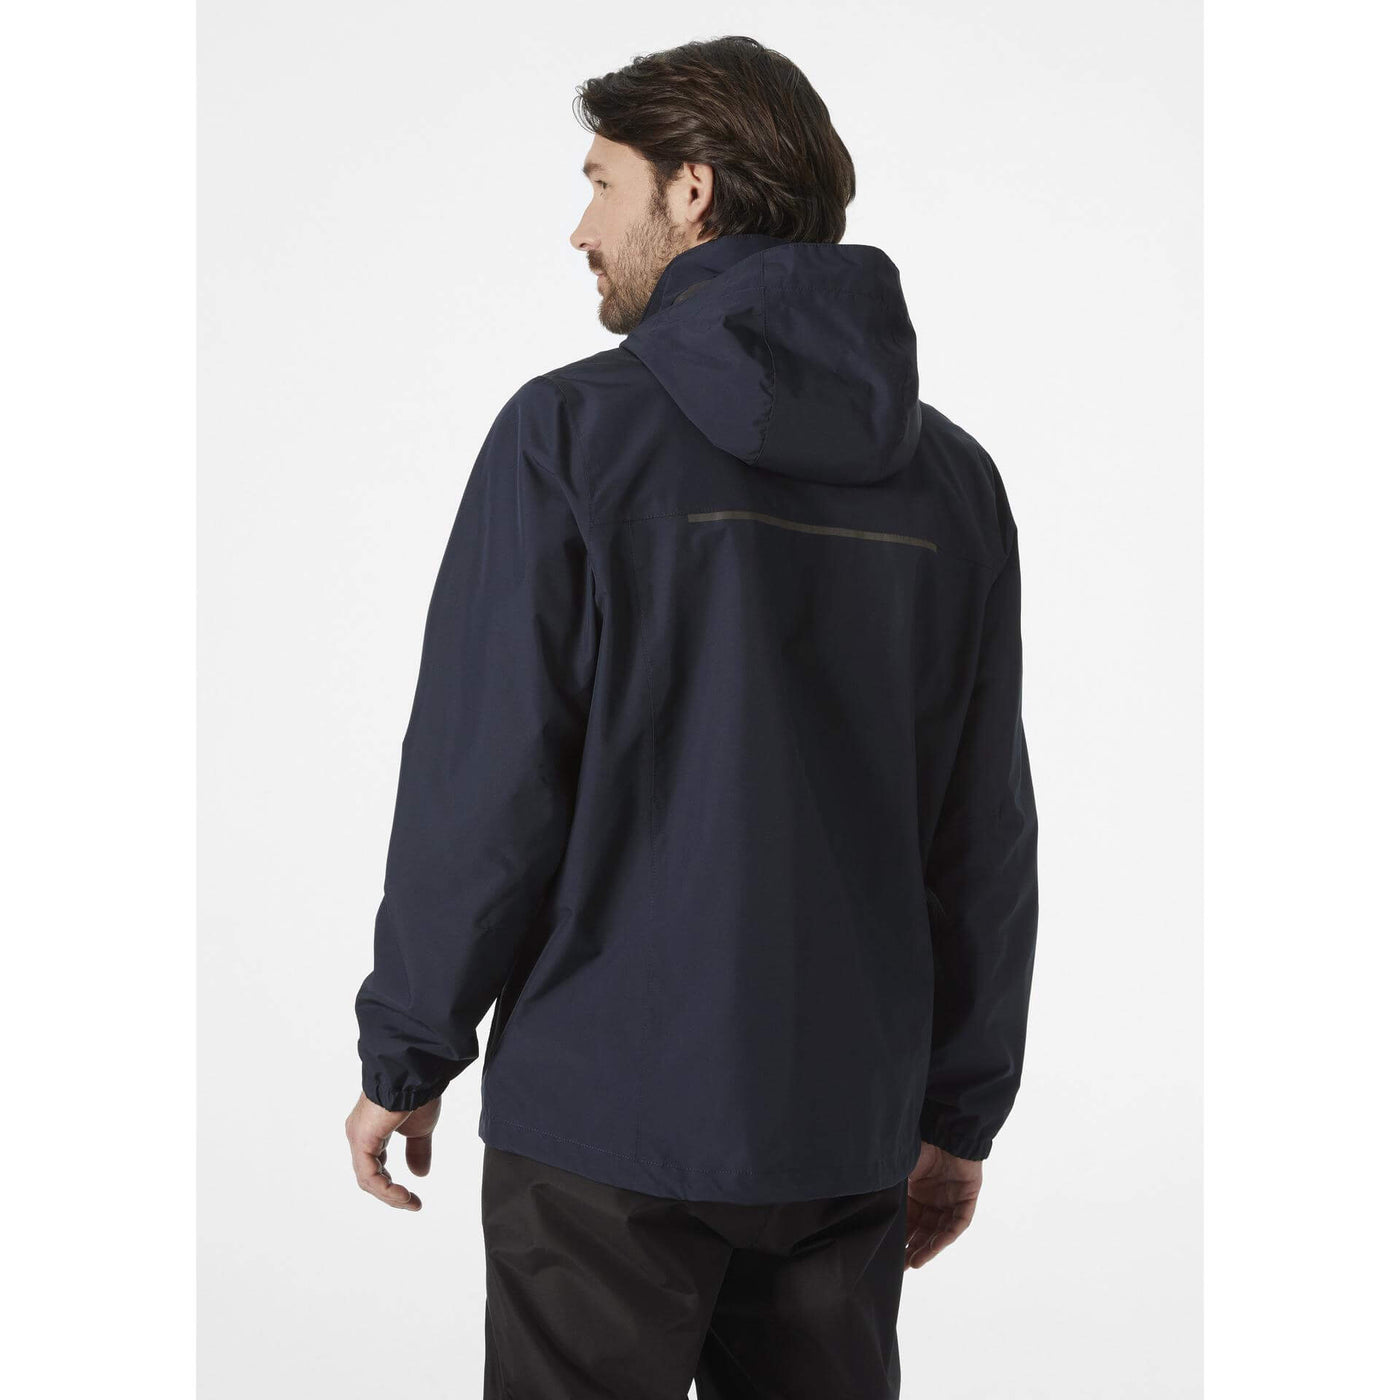 Helly Hansen Manchester 2.0 Waterproof Shell Jacket Navy OnBody 2#colour_navy